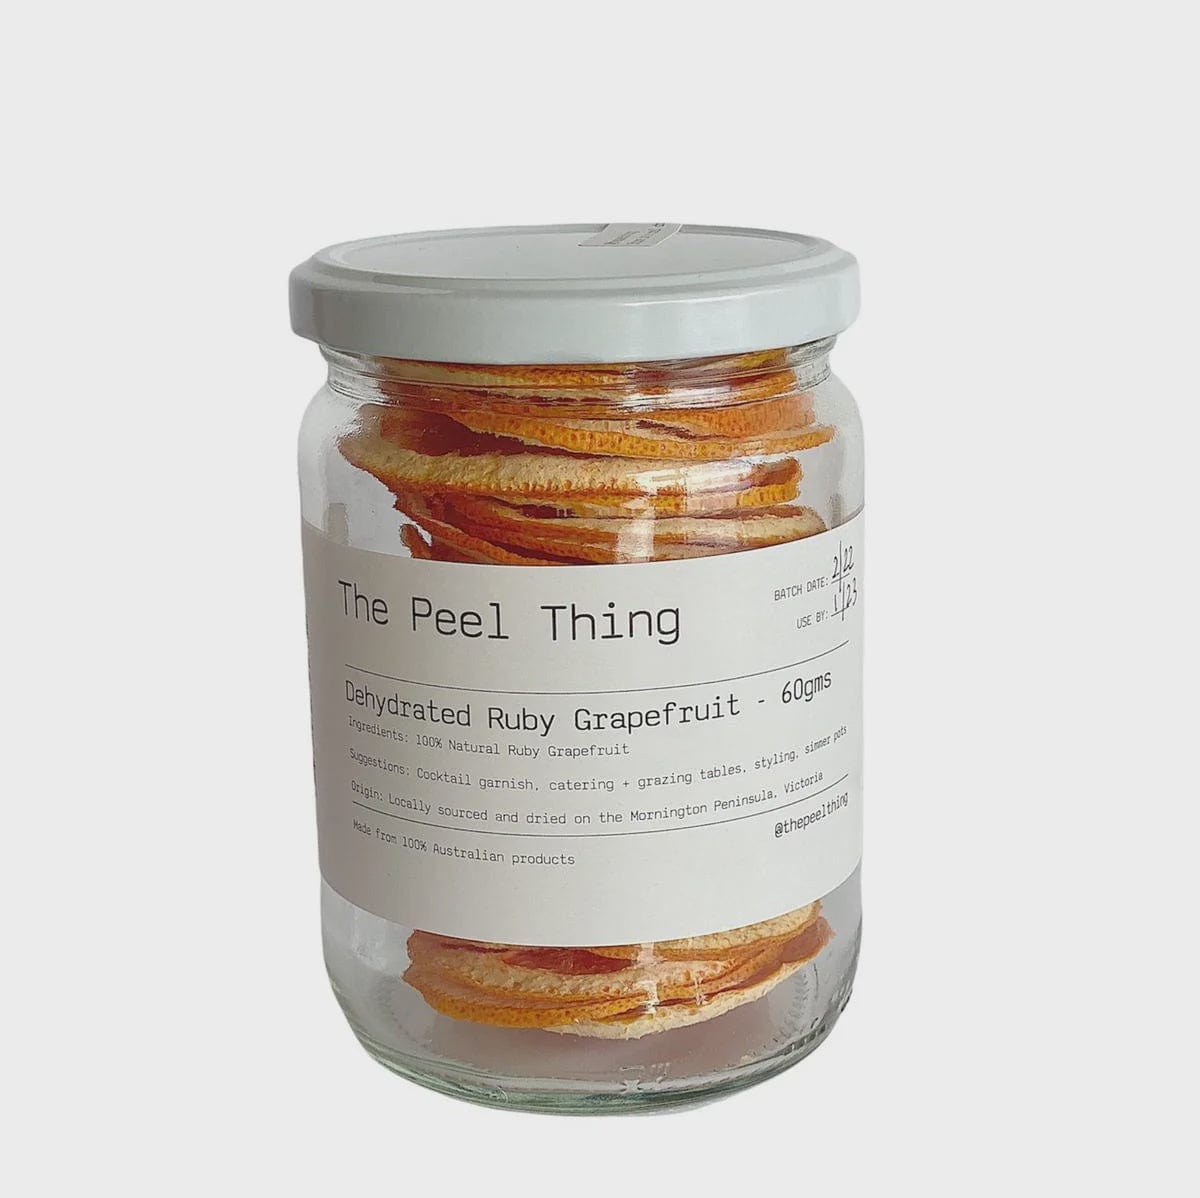 The Peel Thing Natural Dehydrated Ruby Grapefruit